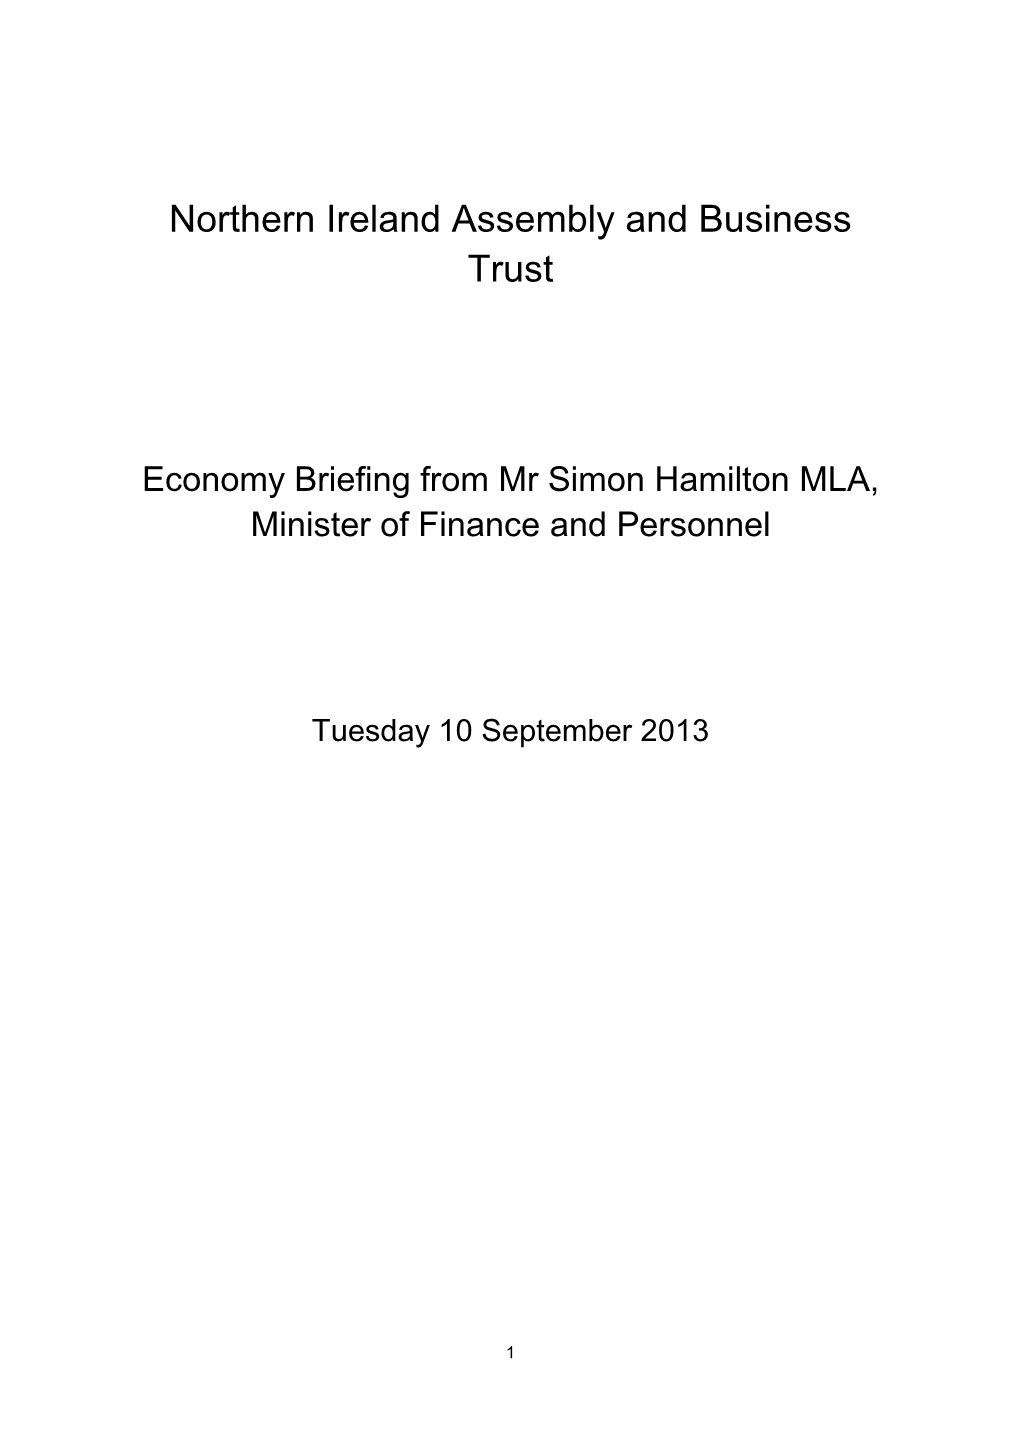 View Transcript of the Minister's Briefing